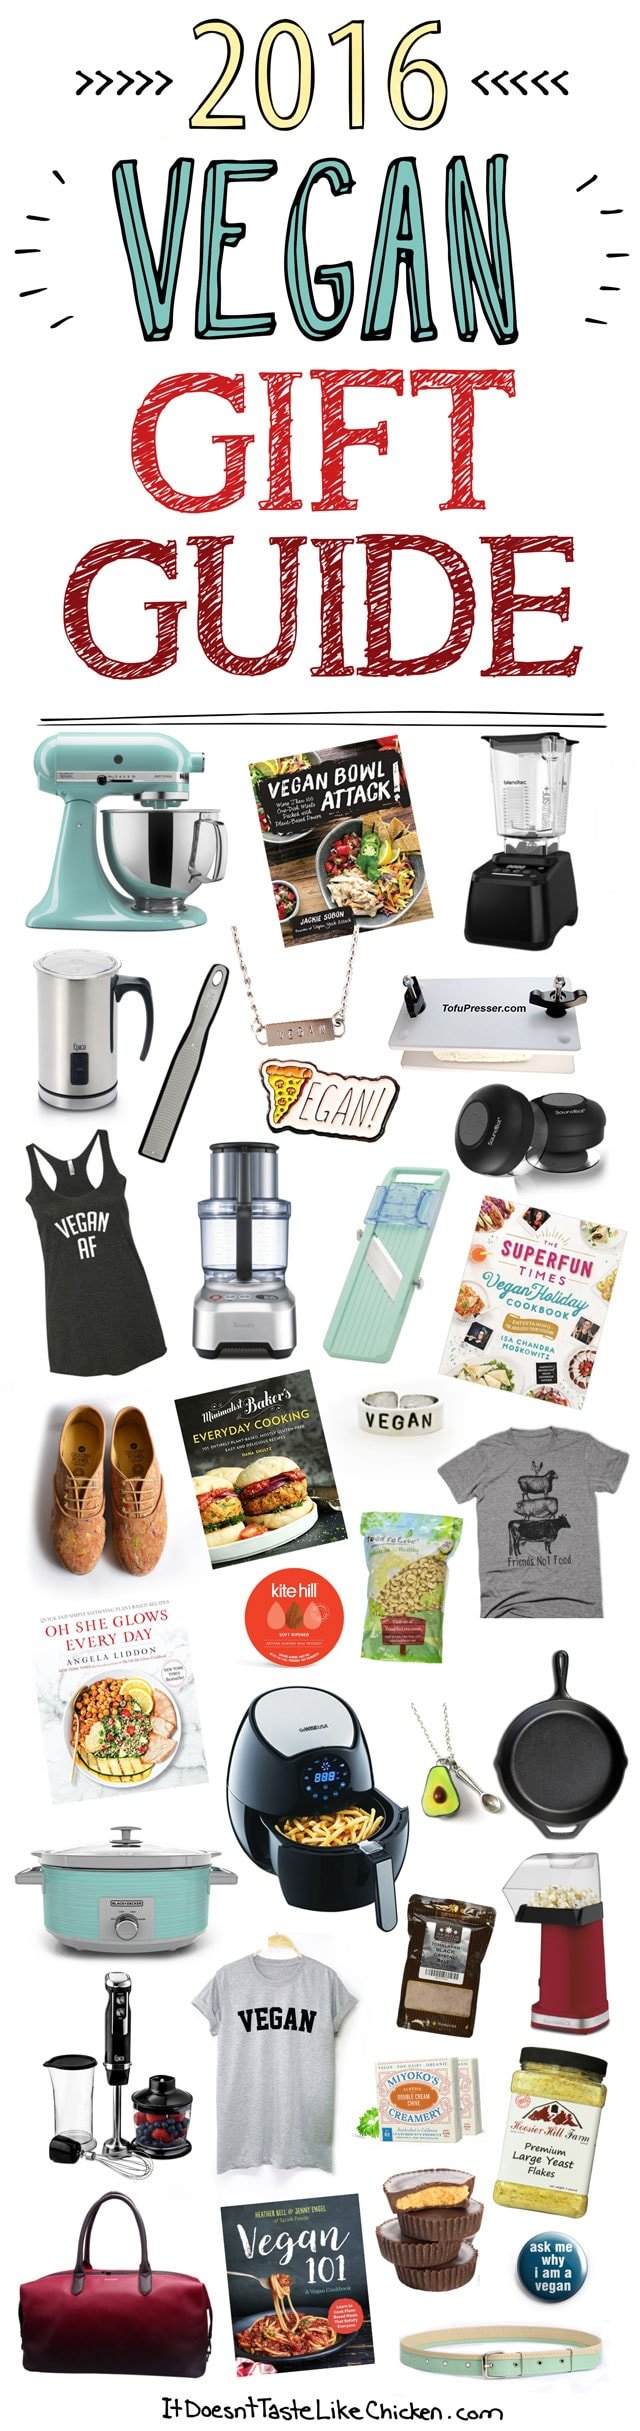 2016 Vegan Gift Guide to make all your holiday shopping easy. Lots of ideas to fit every budget. Just in time for Christmas! #itdoesnttastelikechicken